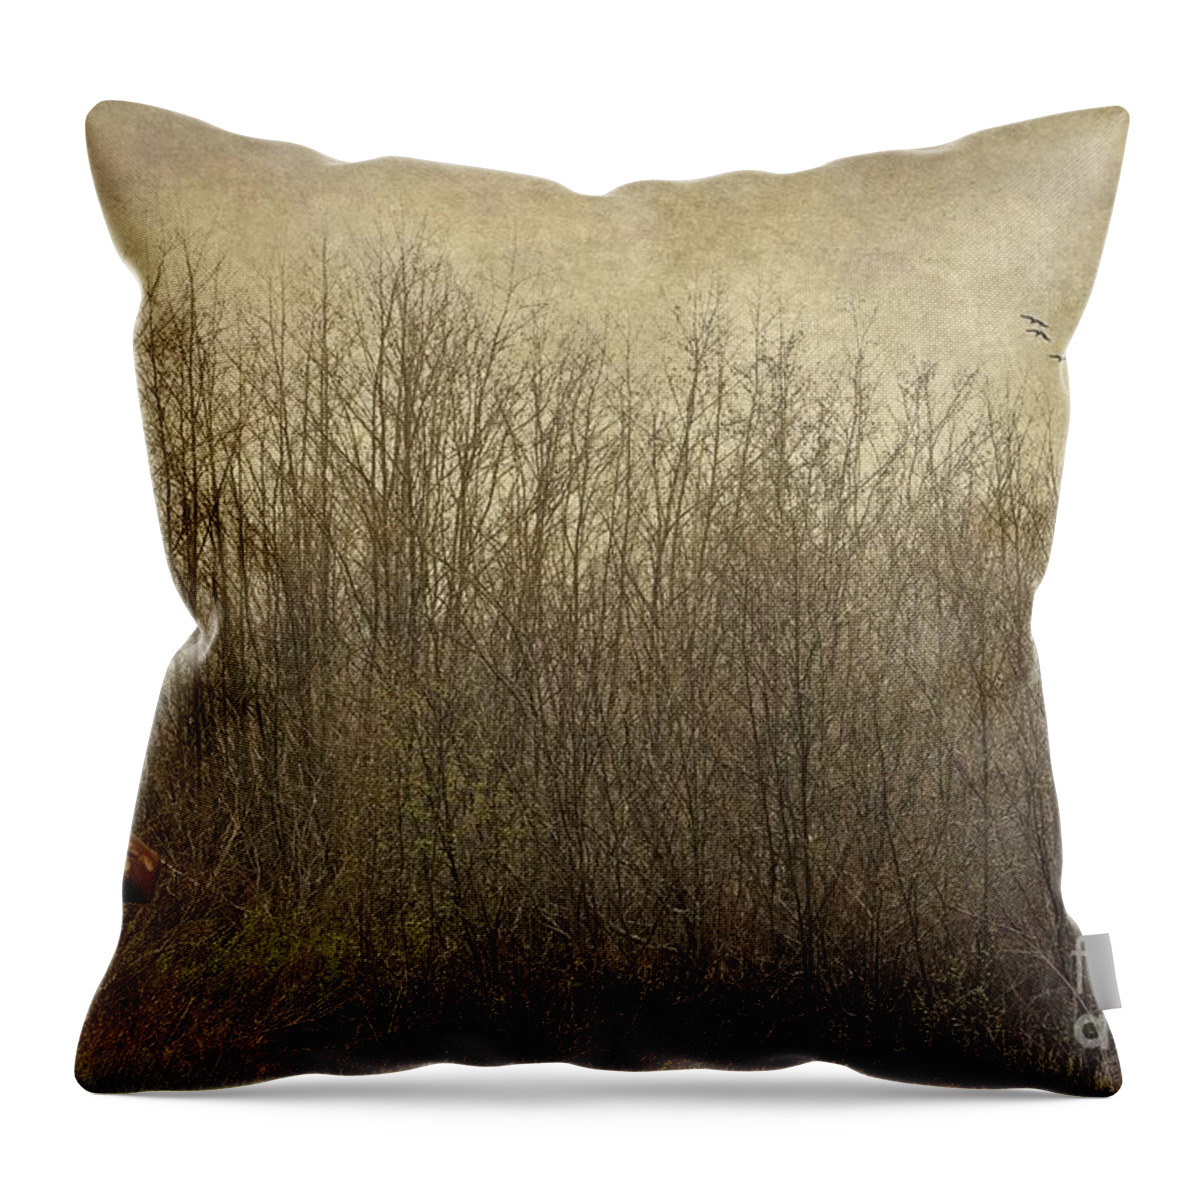 Maine Throw Pillow featuring the photograph Rural Mailbox by Karin Pinkham